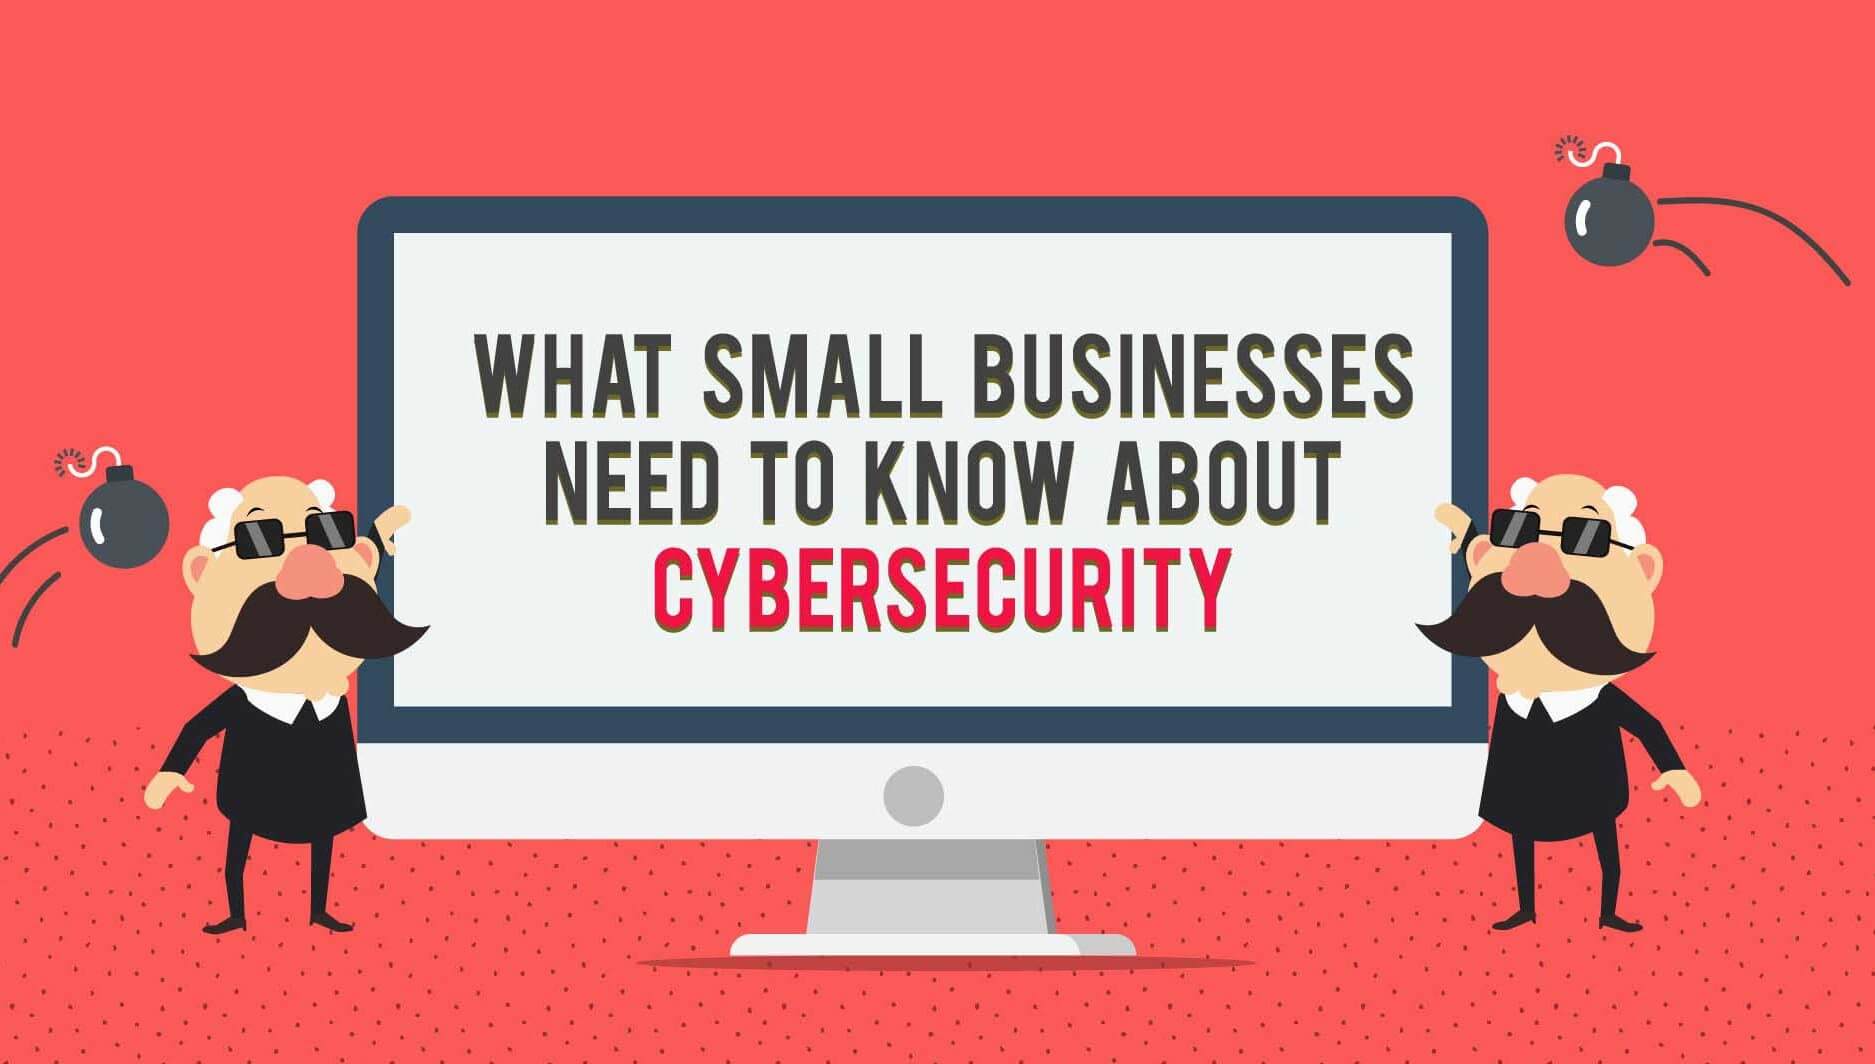 Header image for infographic about cybersecurity for small businesses